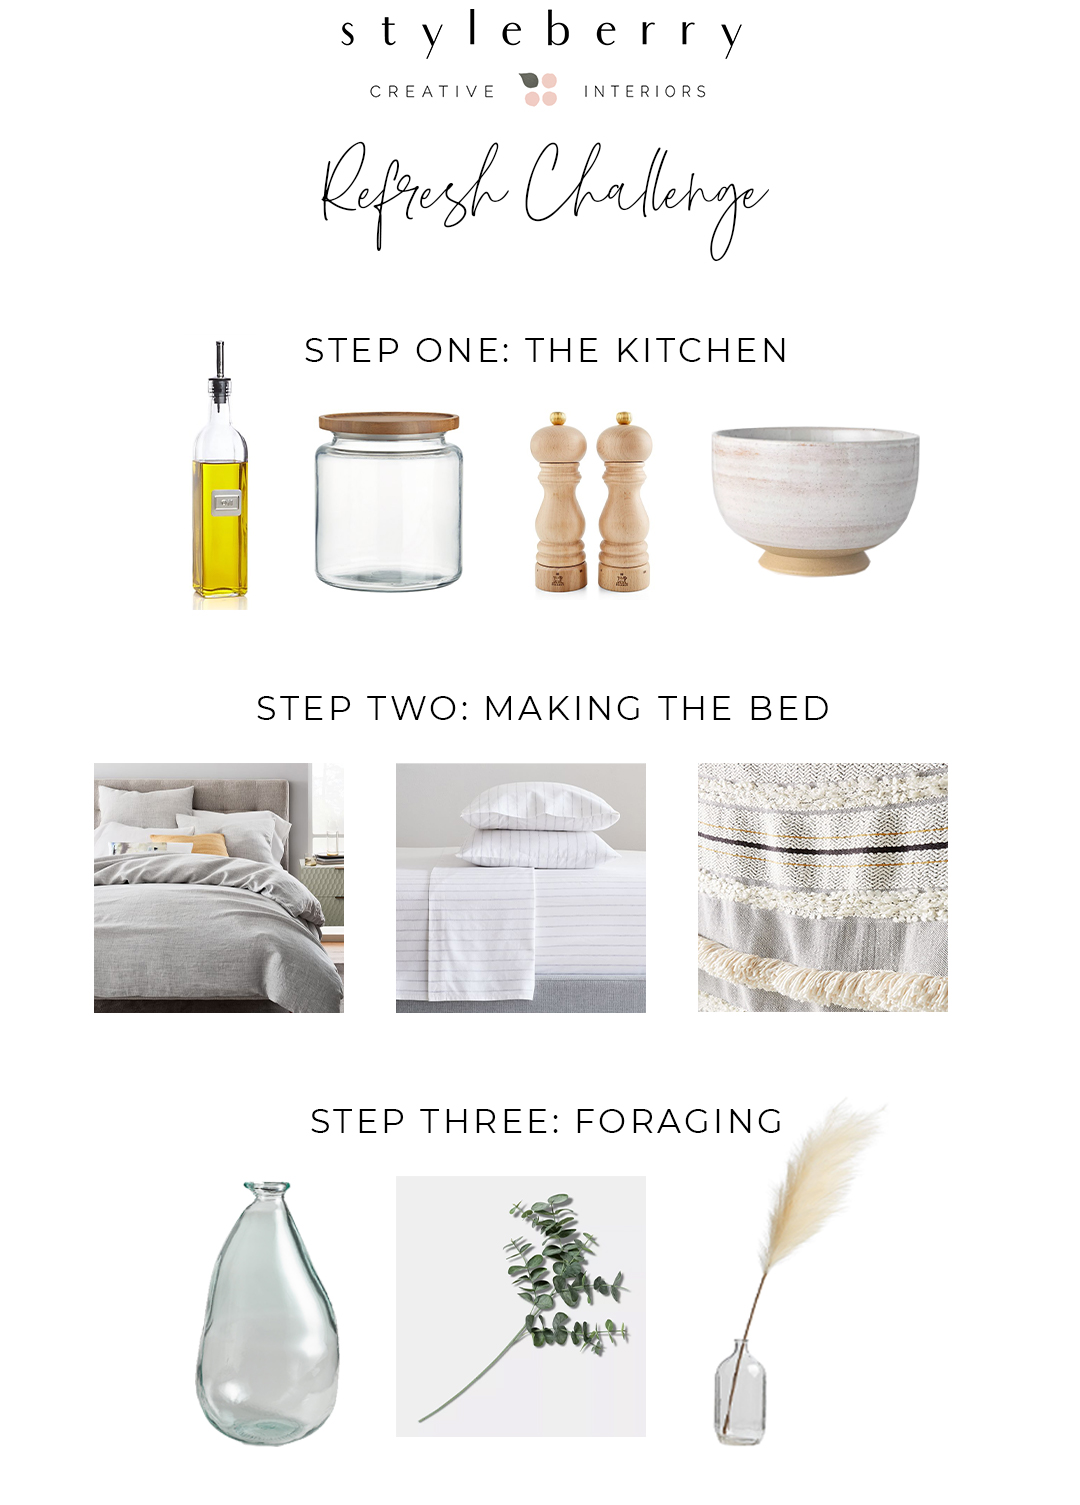 how to style your kitchen how to make a bed what to put in a vase | styleberry creative interiors